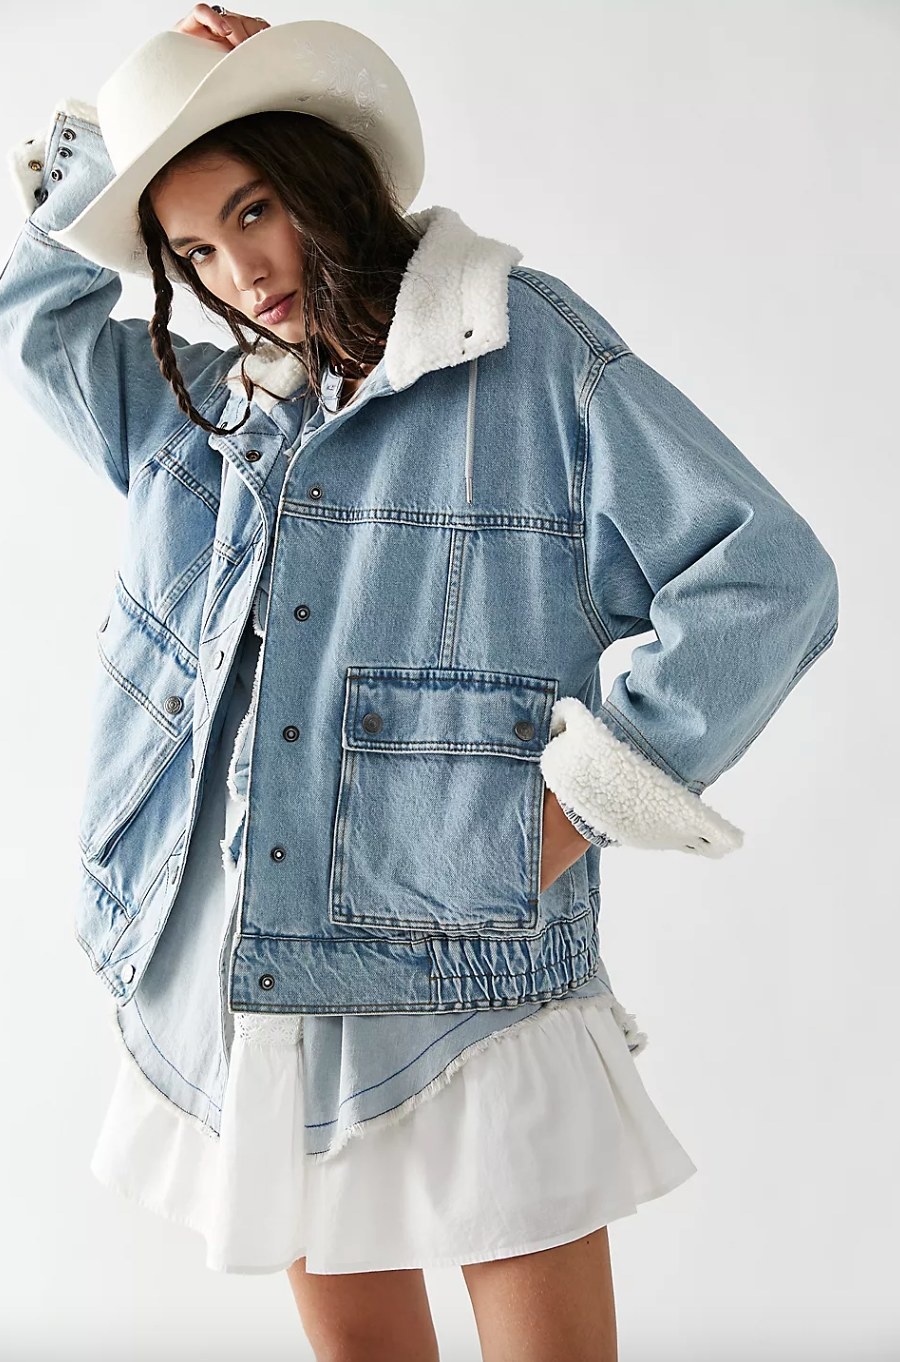 a model wearing the light denim jacket with a white dress and white cowboy hat